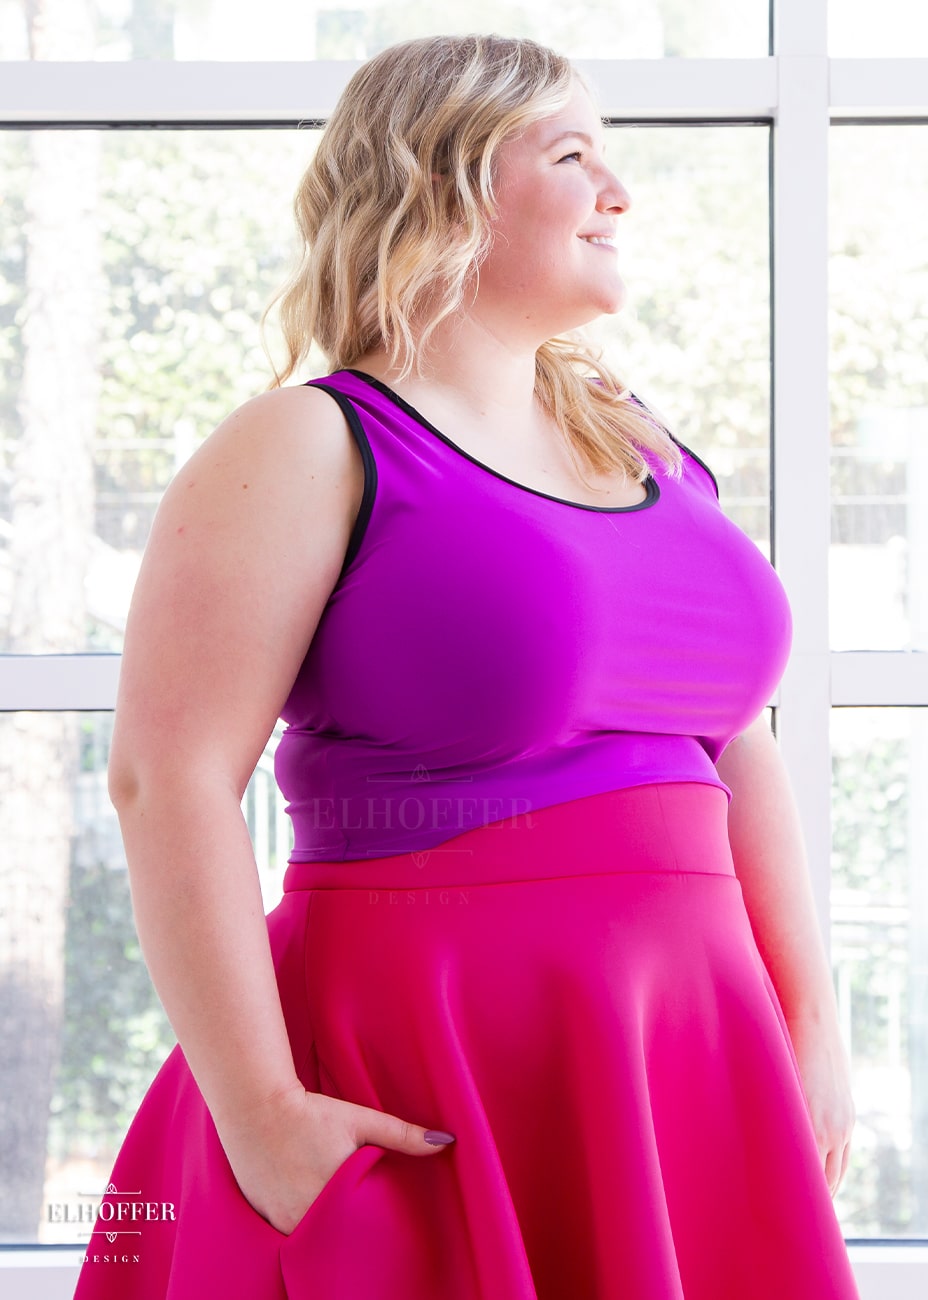 Sarah, a fair skinned size XL model with long blonde hair, wears a low scoop neckline sleeveless crop top with black foldover binding at the neck and armholes, wide shoulder straps, fitted throughout the body, and ending at the natural waist in a bright magenta.